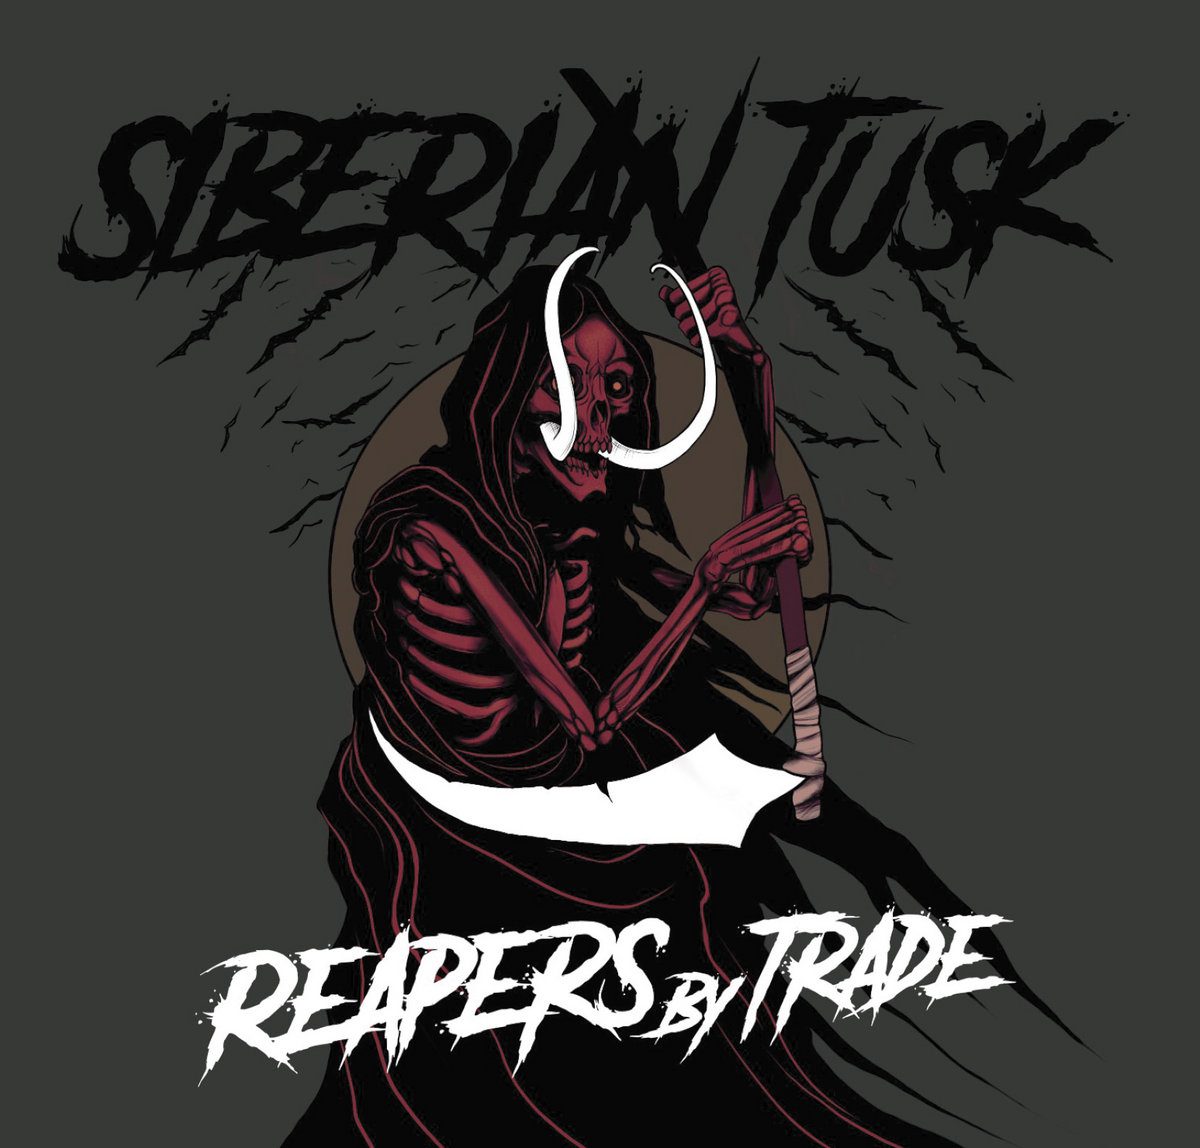 Siberian Tusk  -«Reapers by trade»